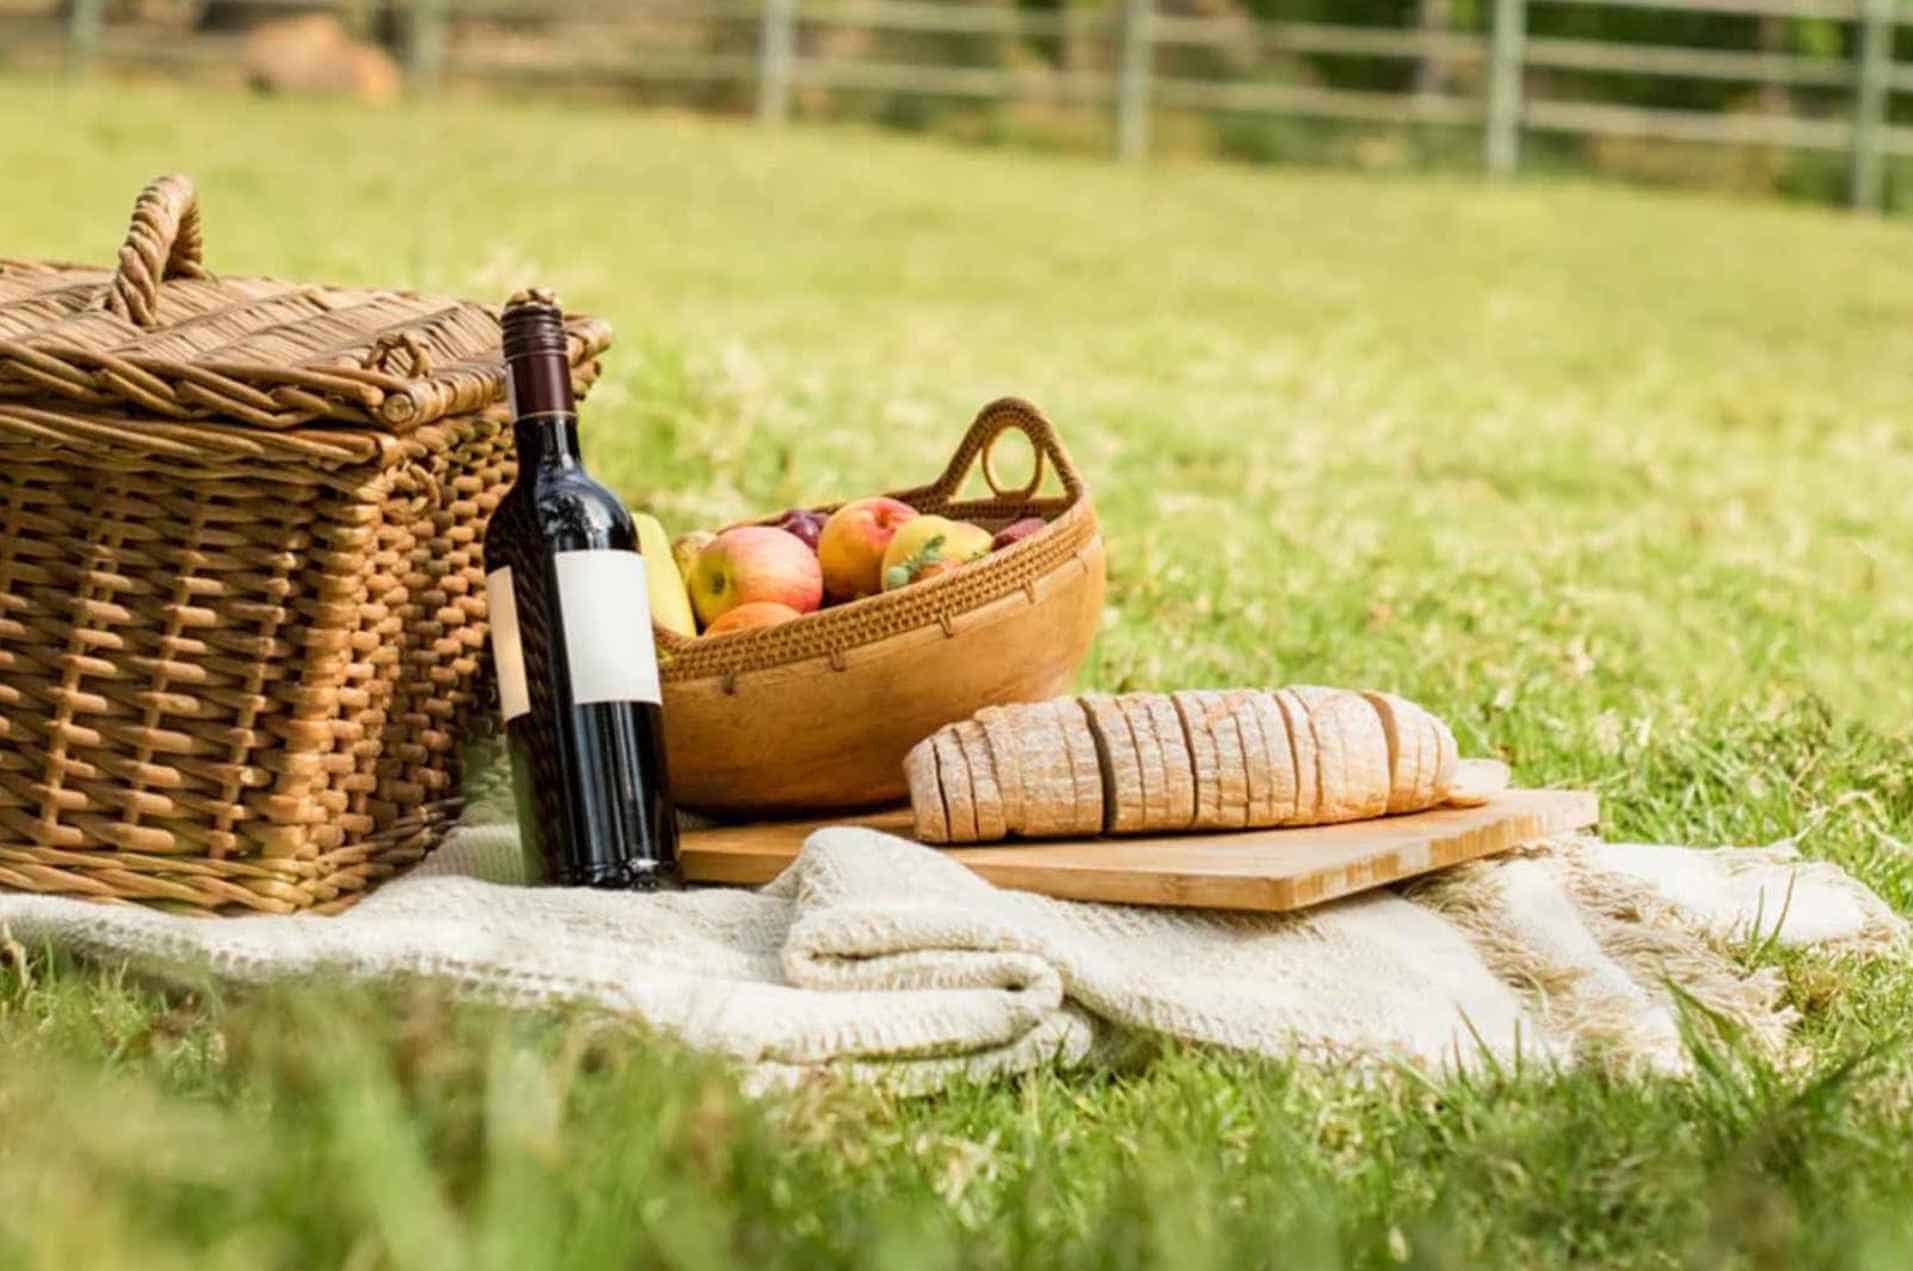 How to Know the Best Wine for Your Picnic